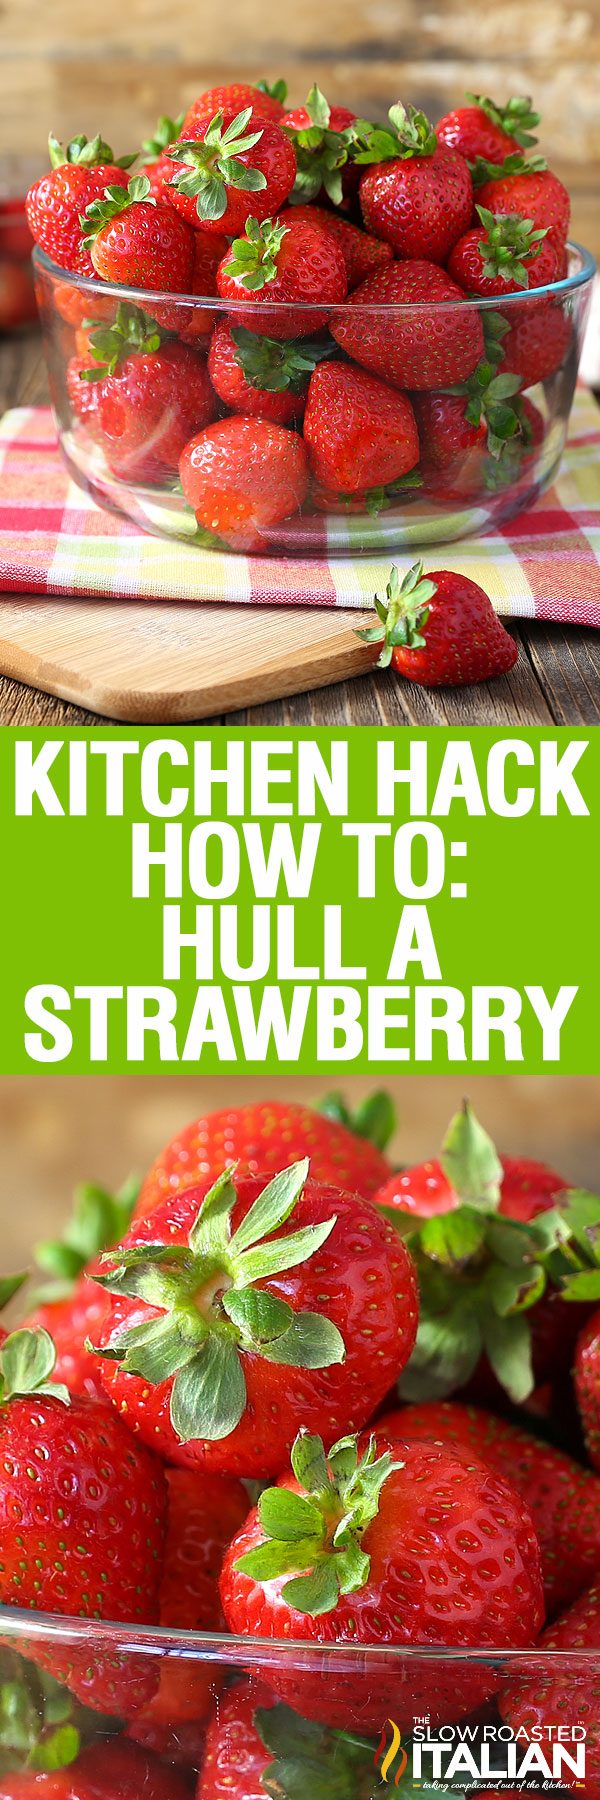 kitchen-hack-how-to-hull-a-strawberry-pin-5424003